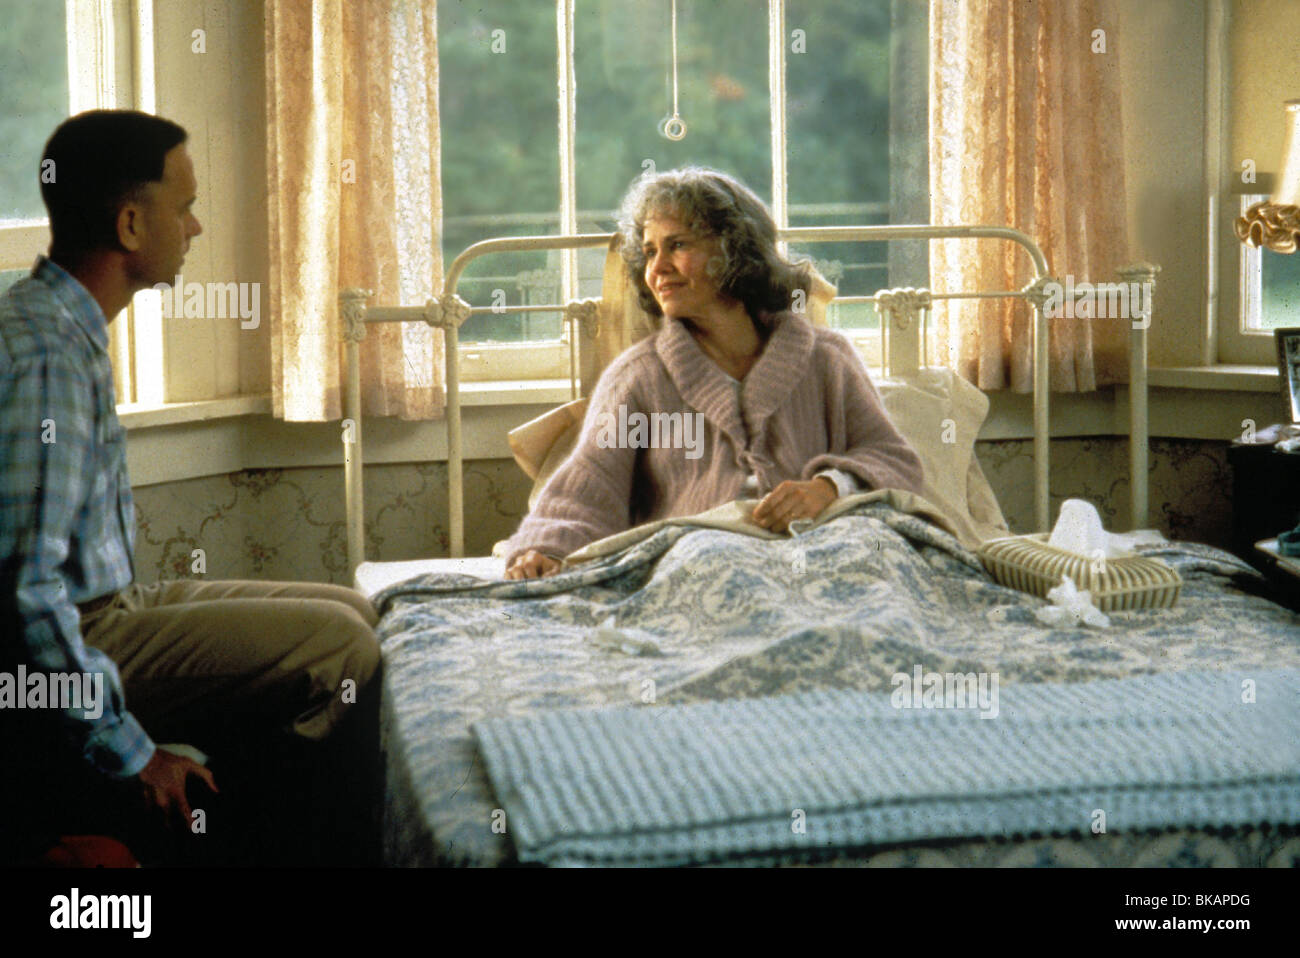 FORREST GUMP (1994) TOM HANKS, SALLY FIELD FORG 048 MOVIESTORE COLLECTION LTD Banque D'Images